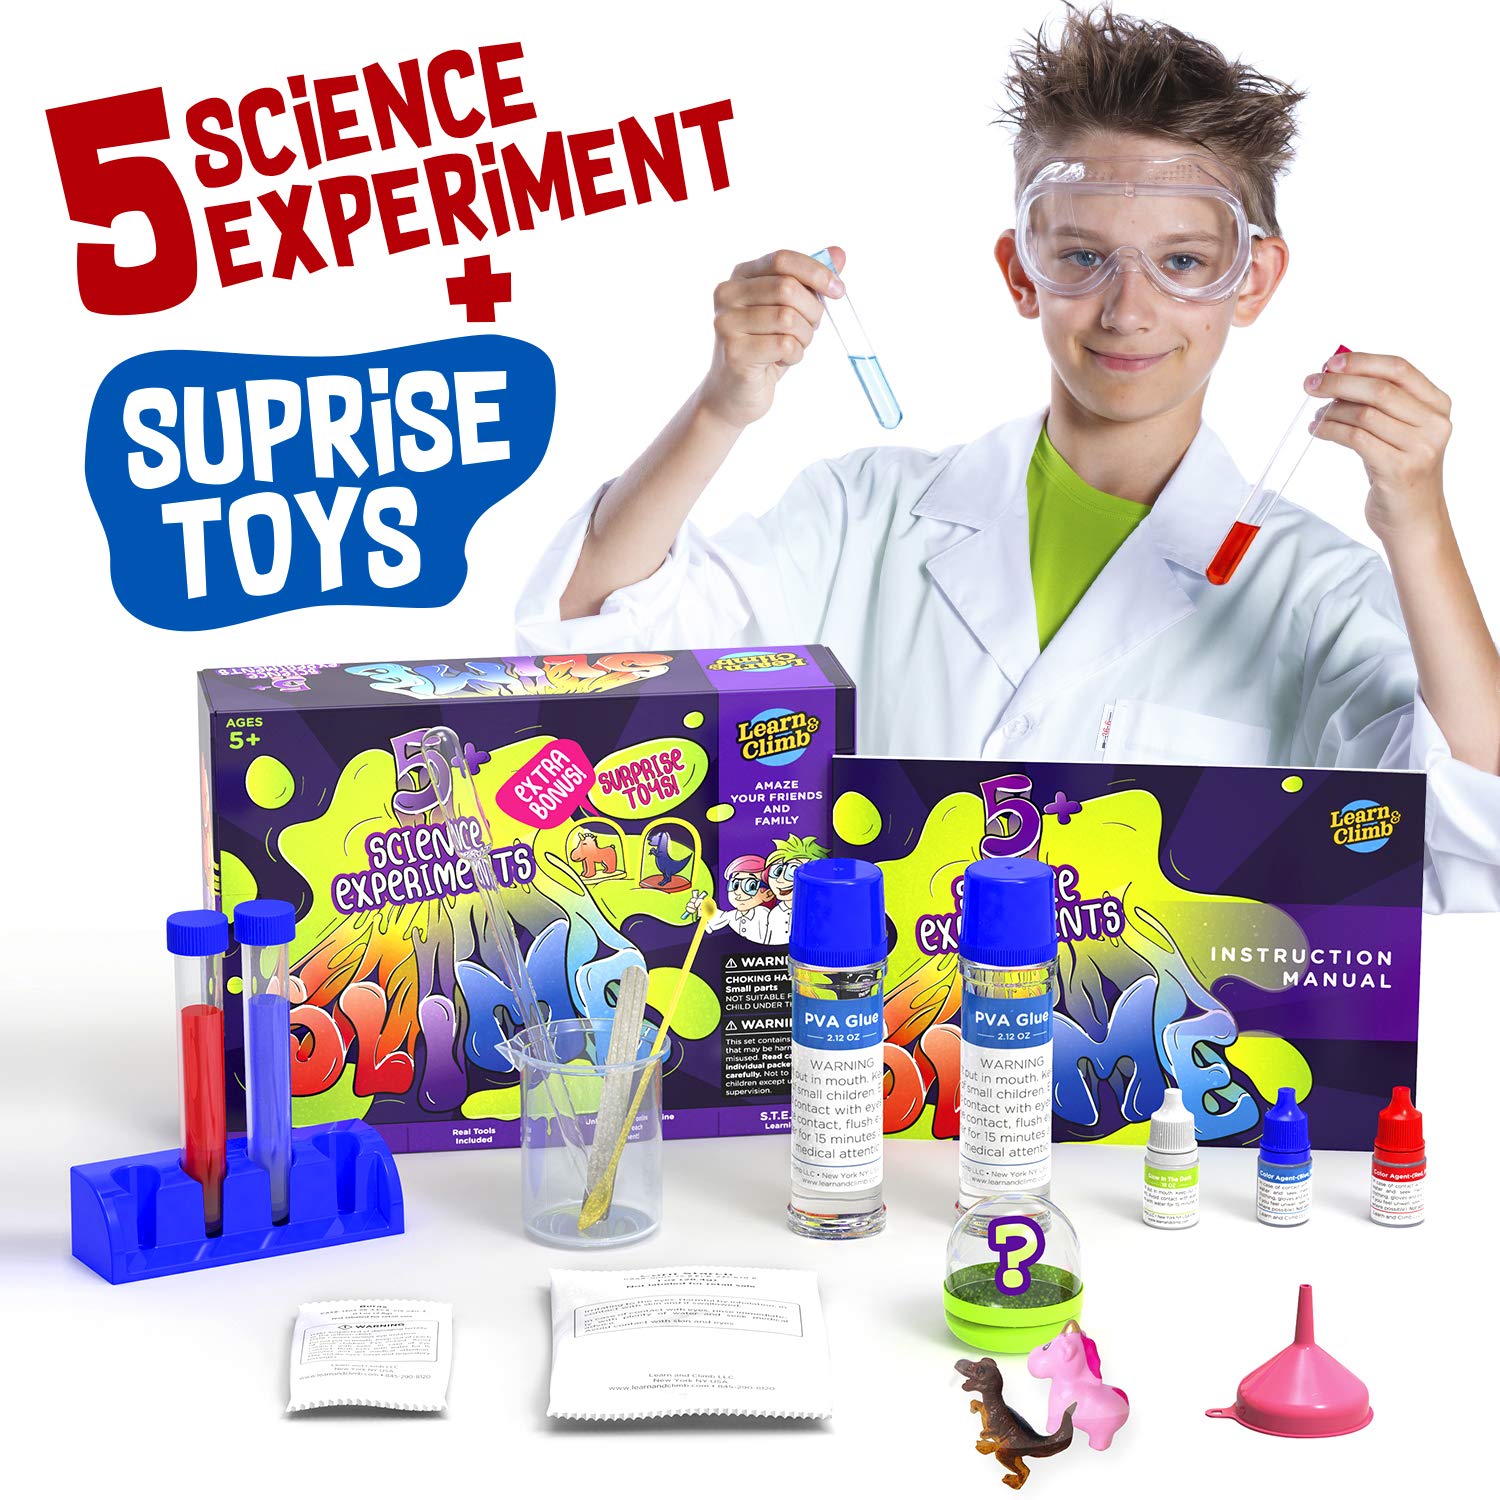 Make Your own Slime lab Kit. 5+ Science Experiments. Great Gifts